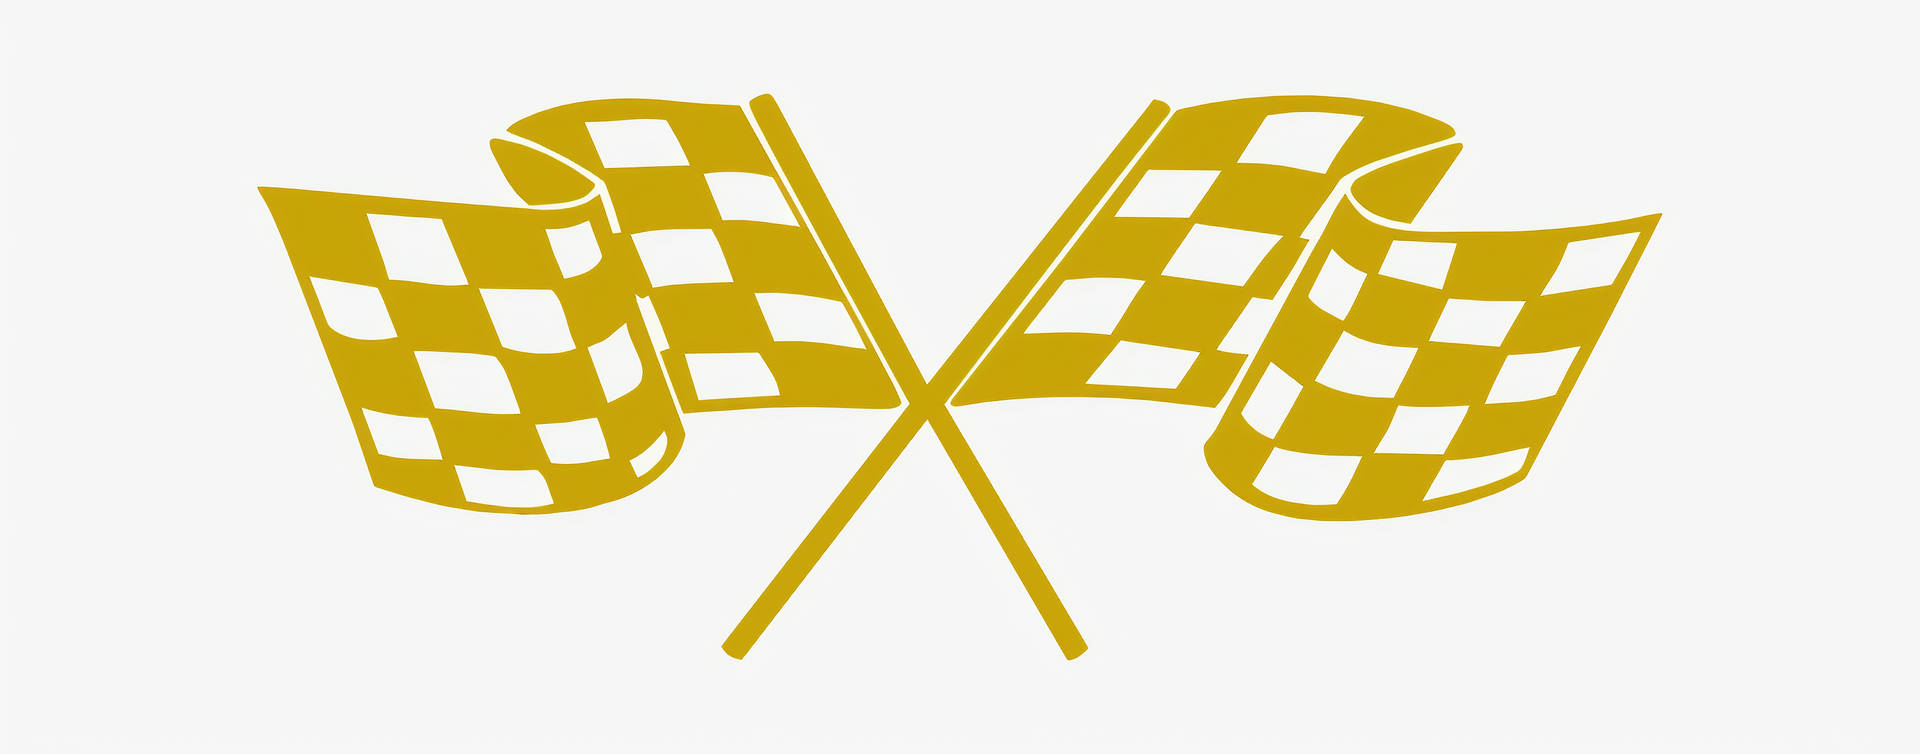 Gold Checkered Flags